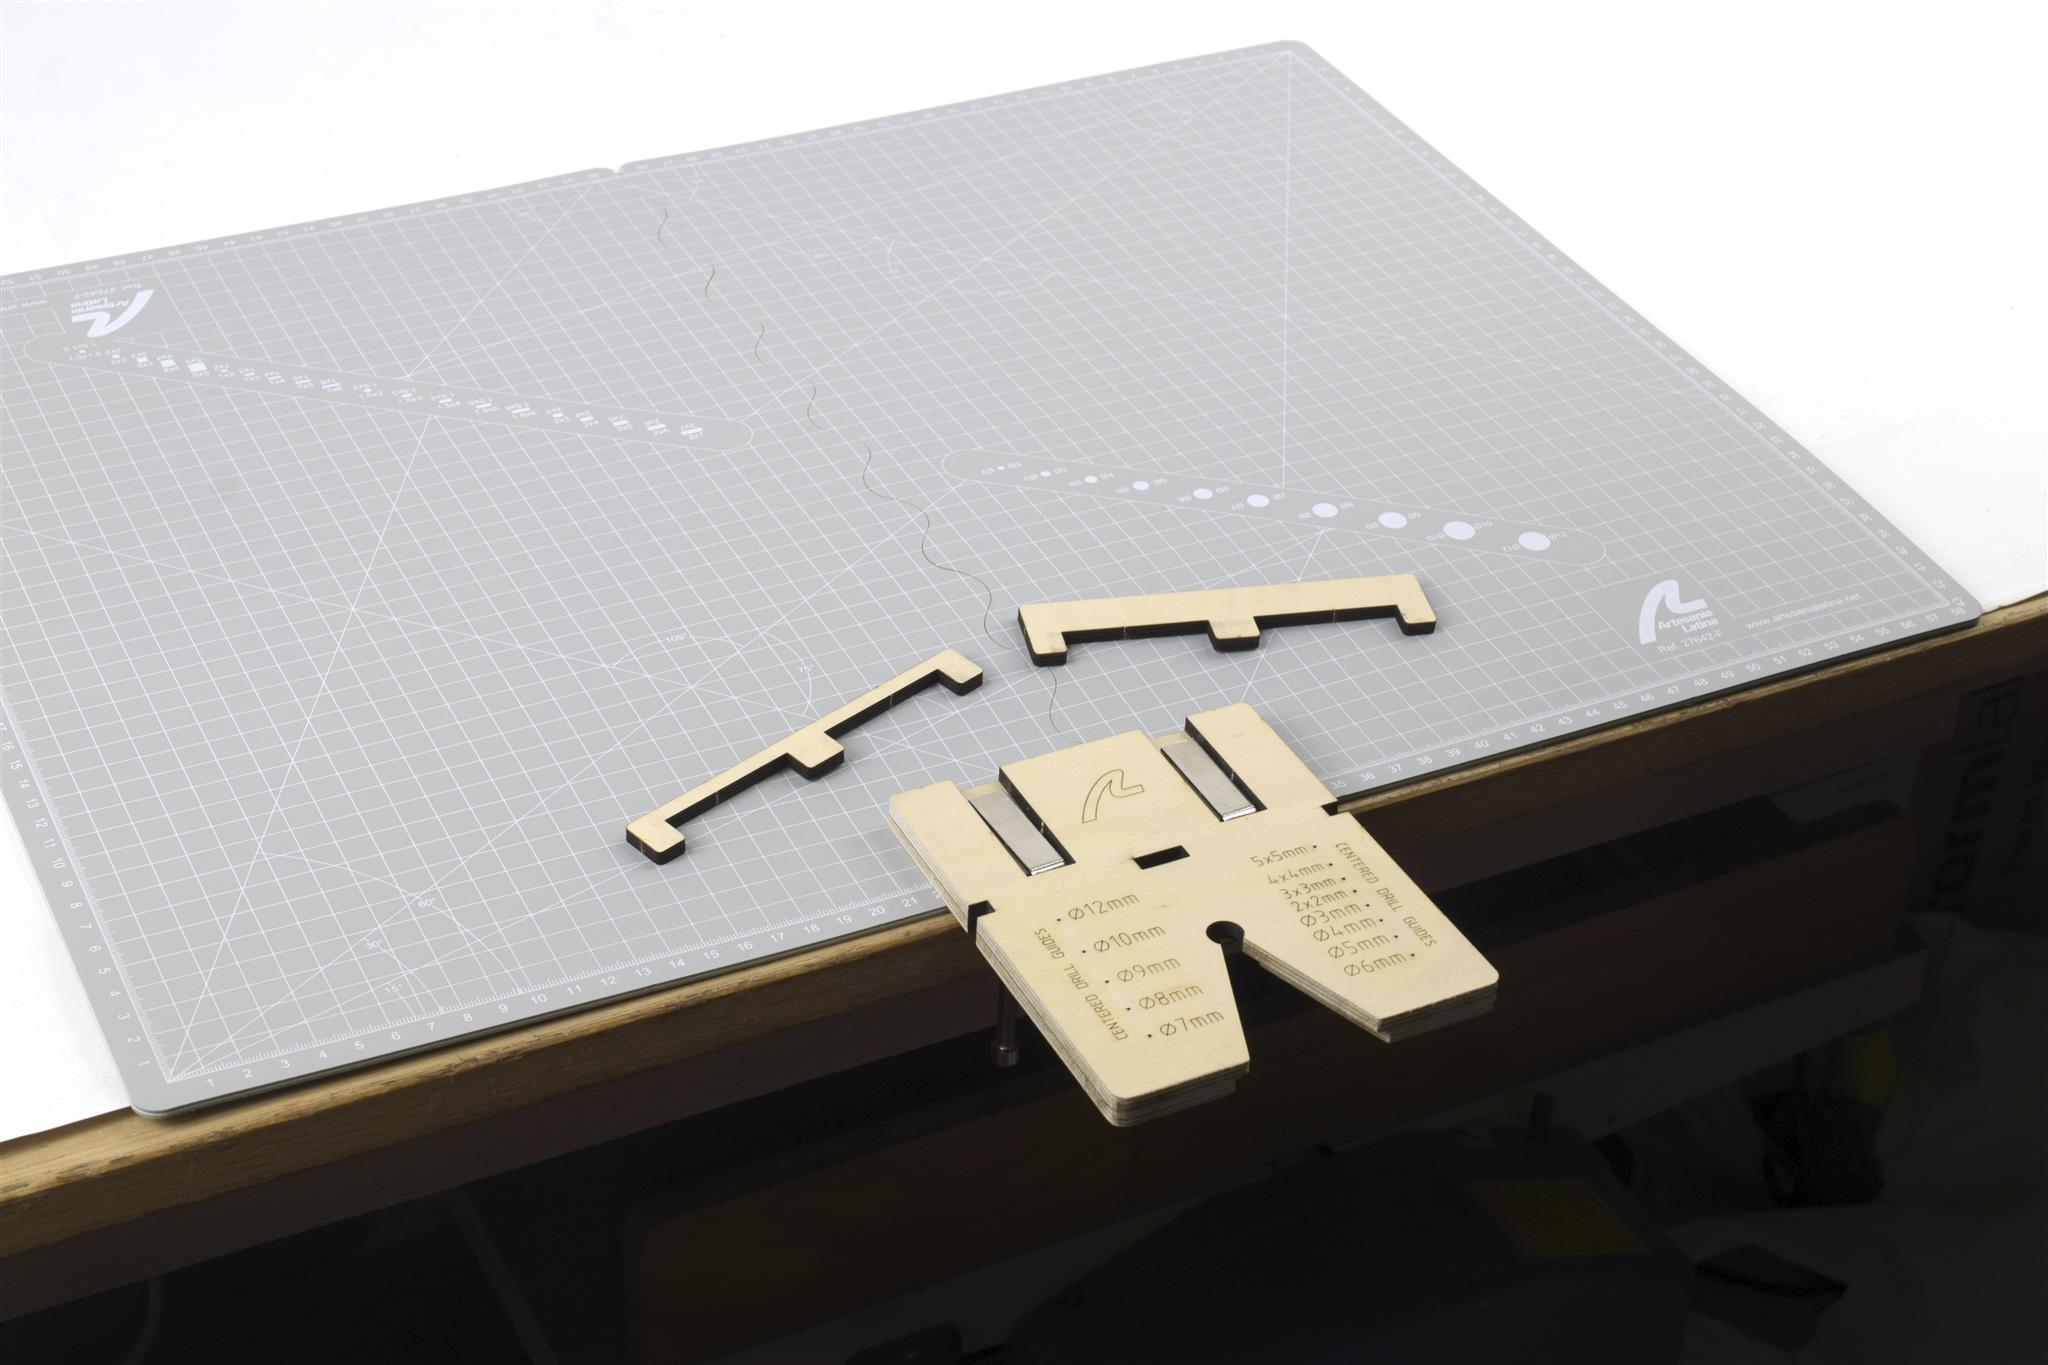 New Modeling Tools: Multi-Function Workbench (27646), by Artesanía Latina.